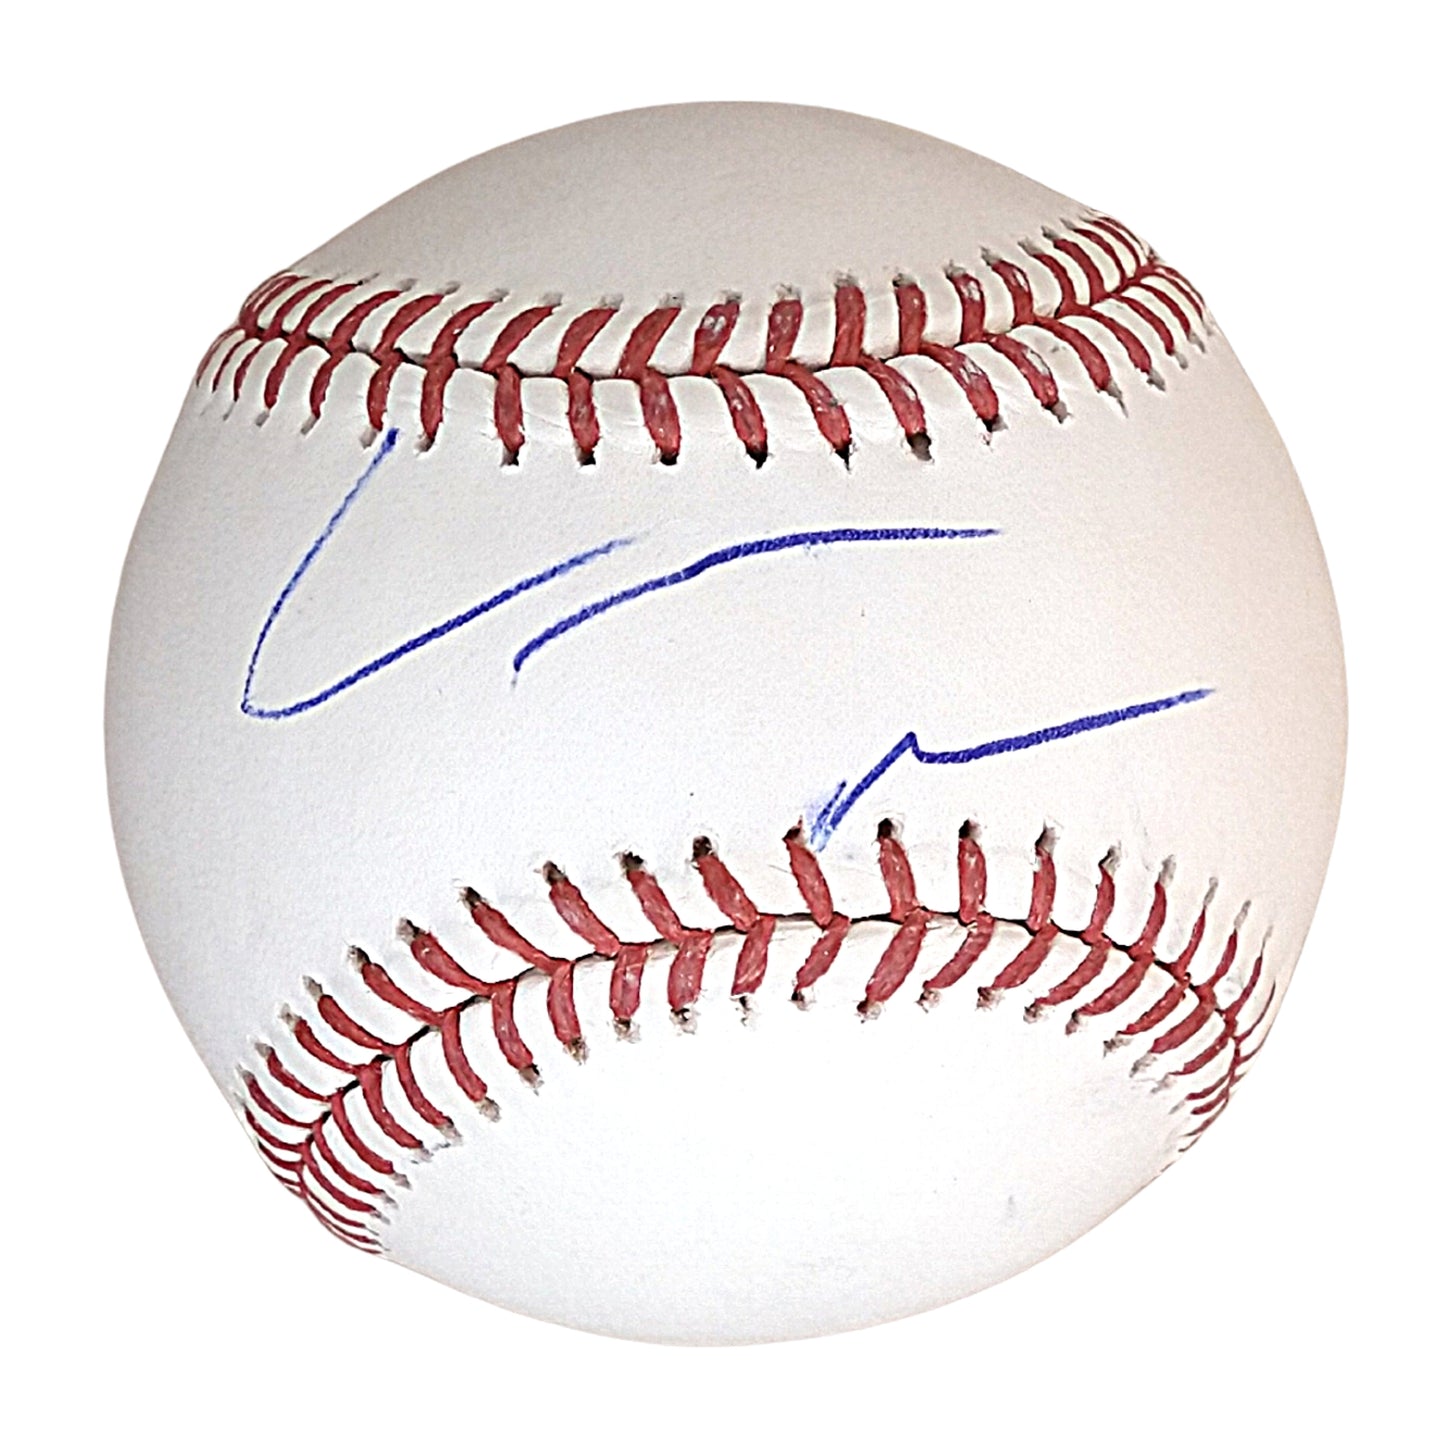 Hollywood- Autographed- Vince Vaughn Signed Rawlings ROMLB Leather Baseball - Wedding Crashers - Old School - Proof Photo - Beckett BAS Authentication - 102